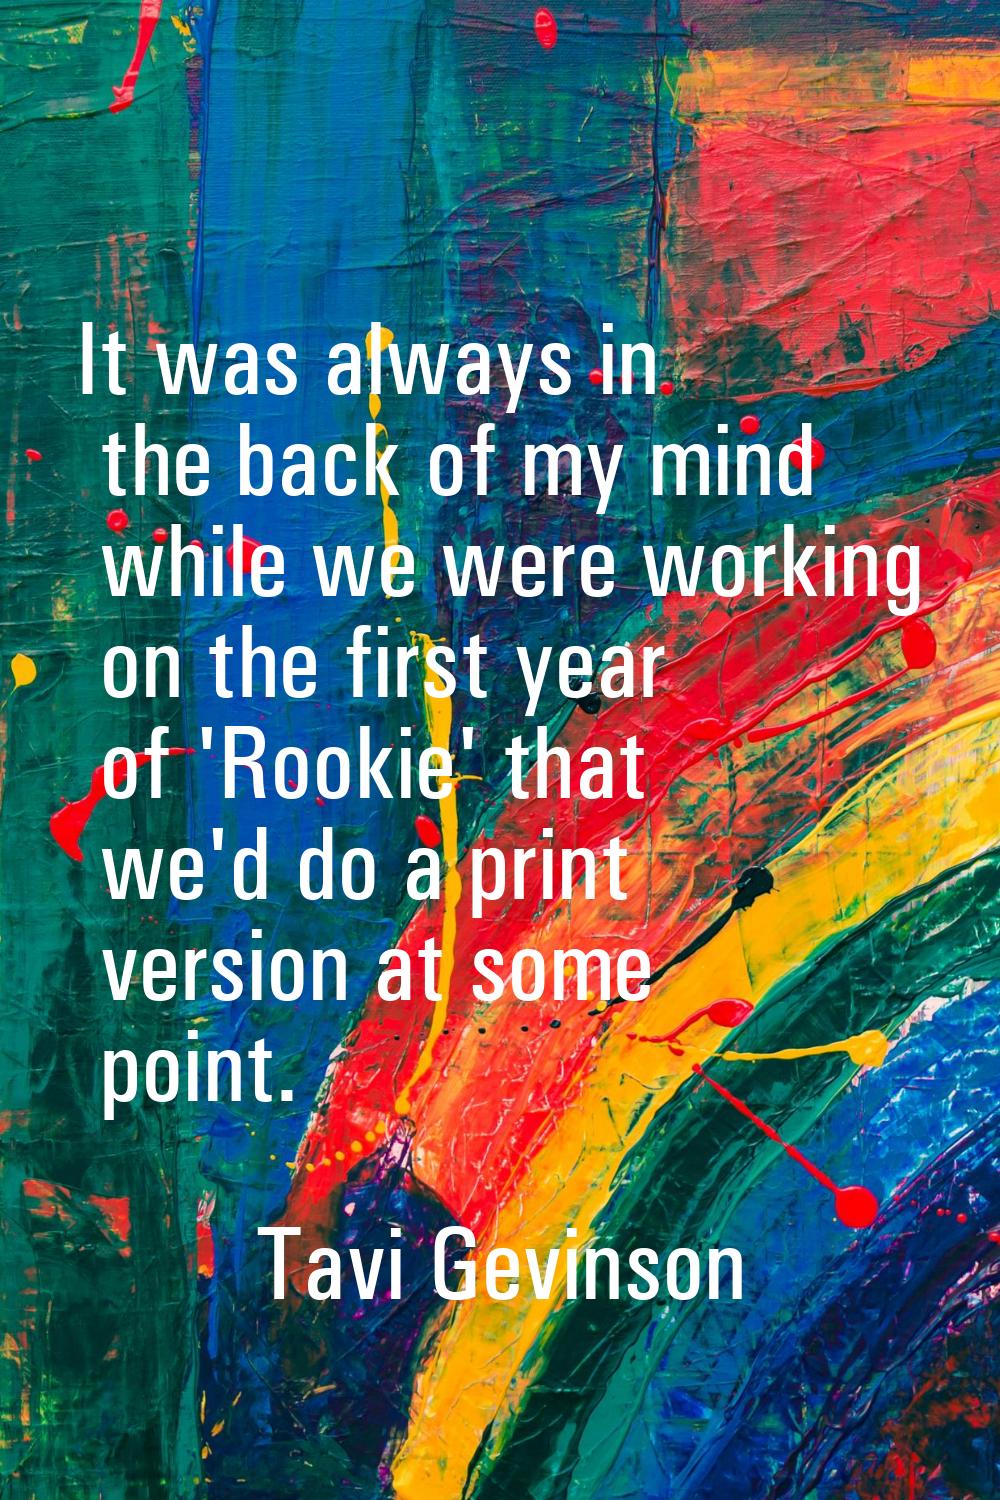 It was always in the back of my mind while we were working on the first year of 'Rookie' that we'd 